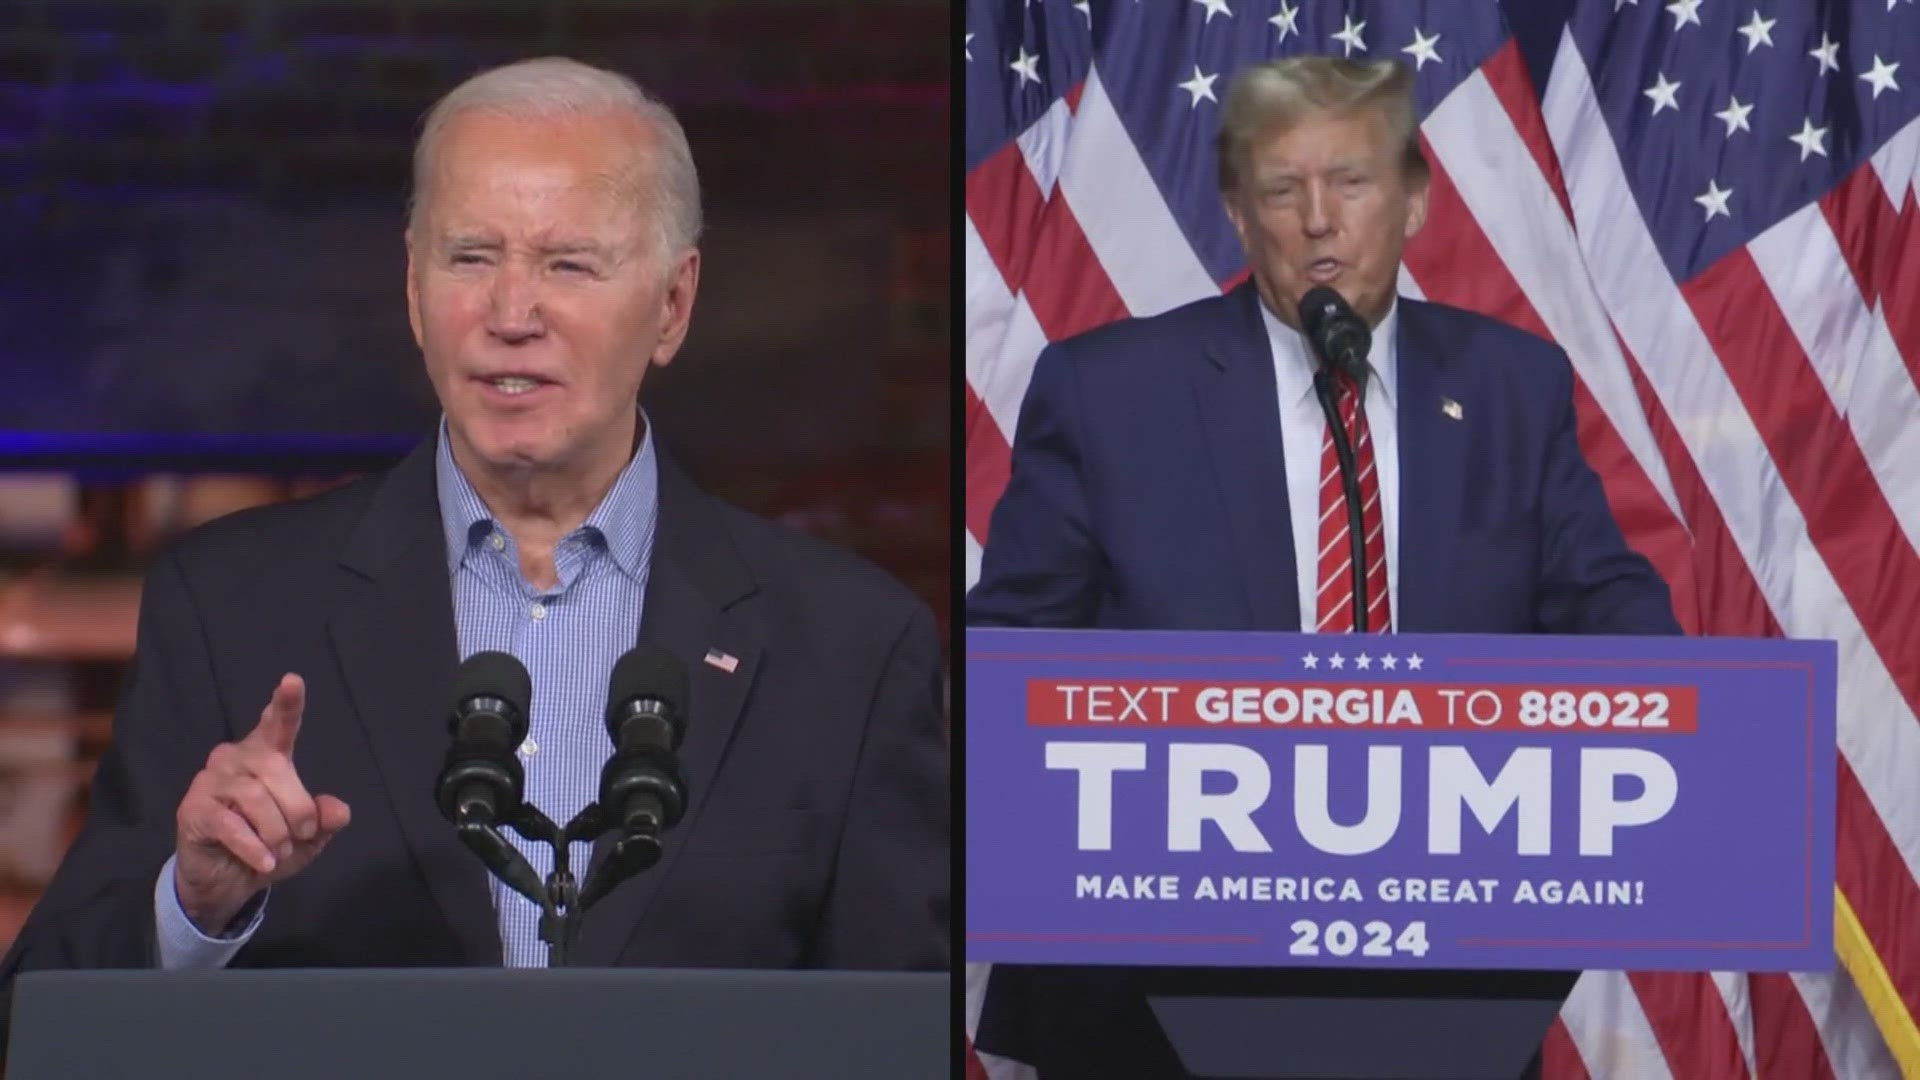 Both Biden and Trump are hoping to clinch their parties' presidential nominations with dominant victories in a slate of state primaries on Tuesday.